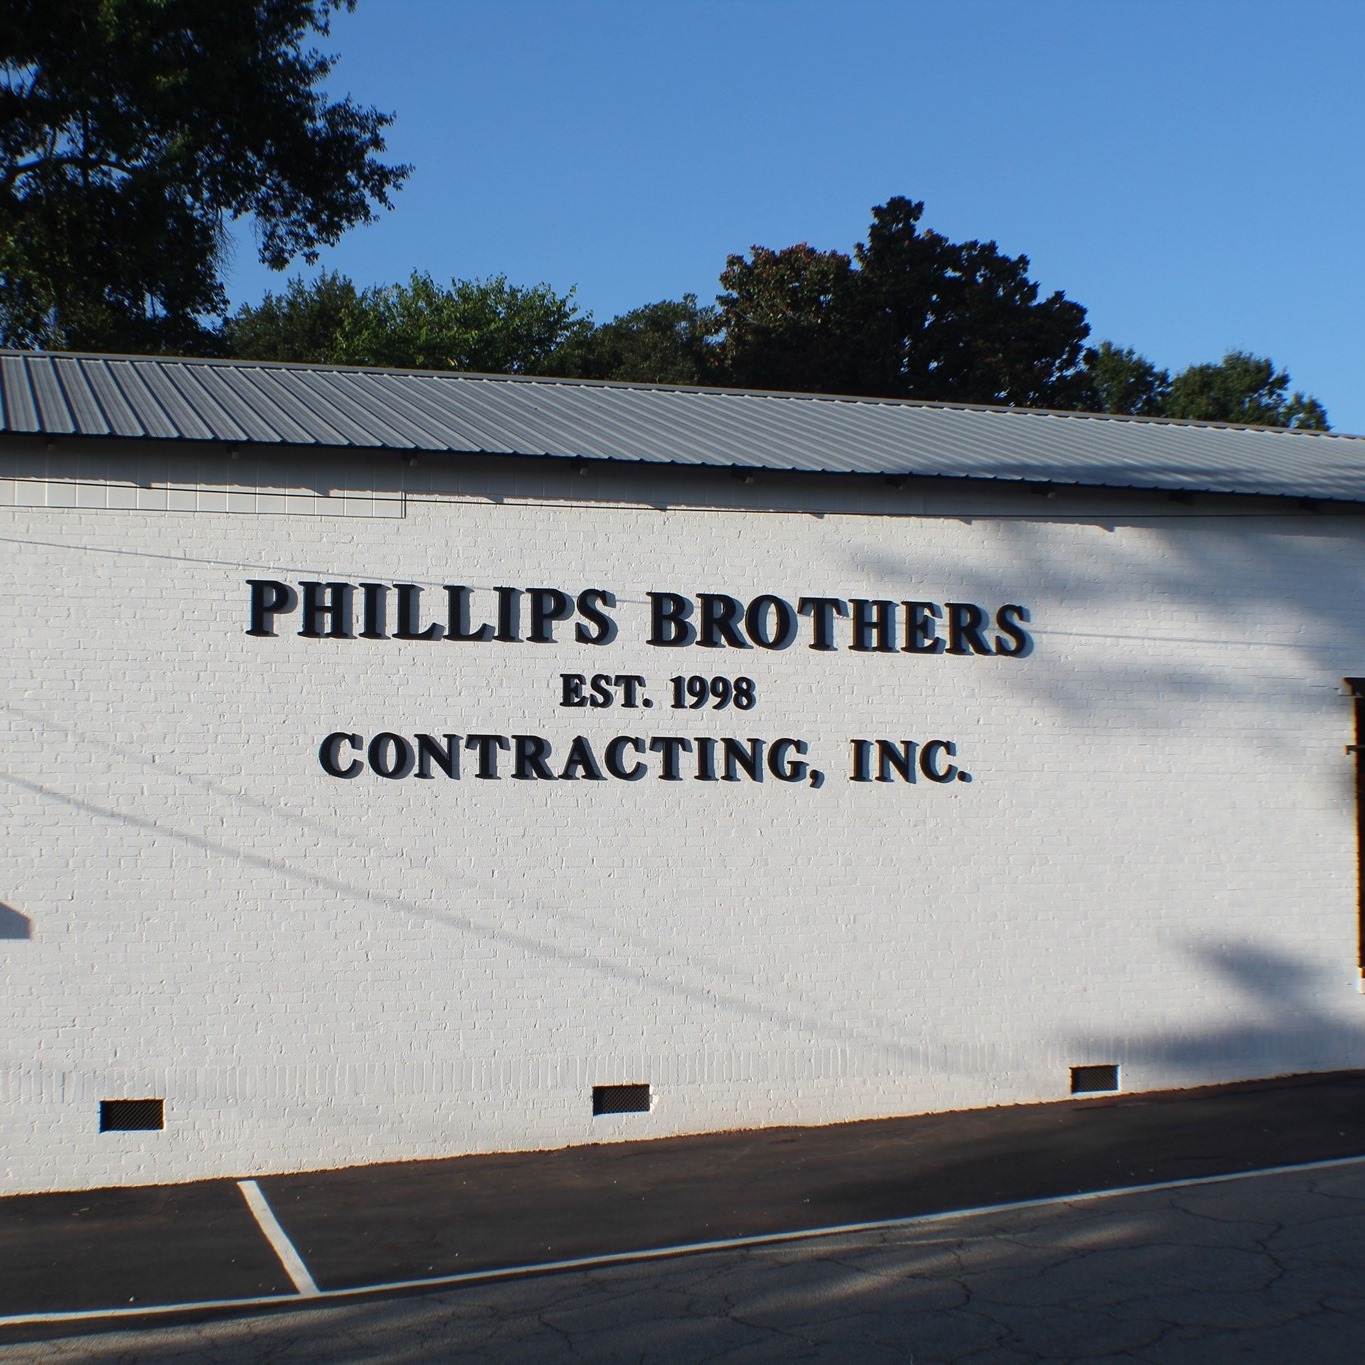 Phillips Brothers Contracting Inc. 109 Railroad St, Hartwell Georgia 30643